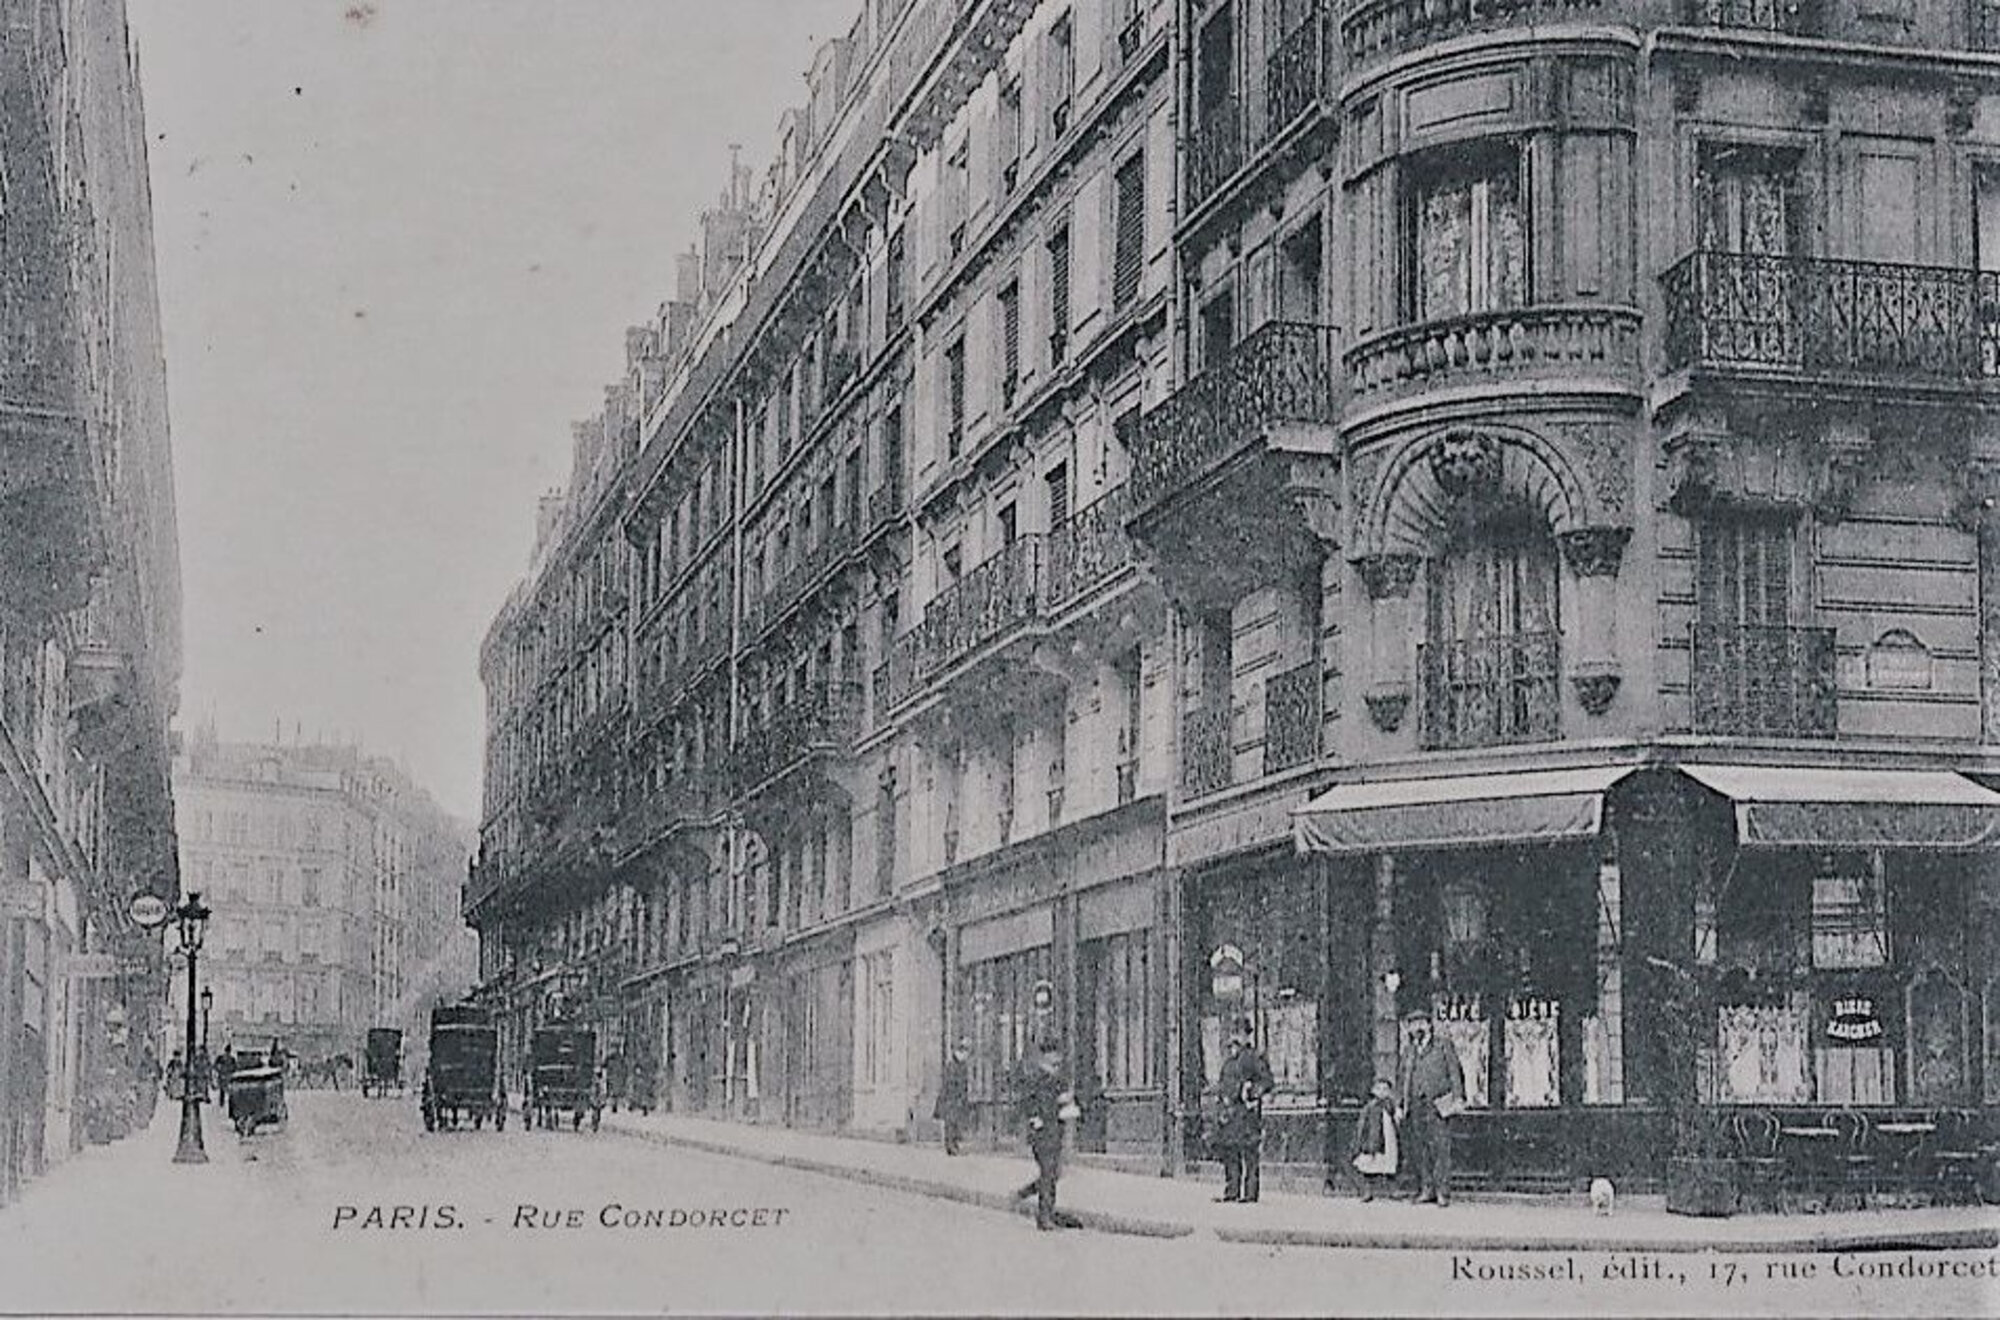 Vintage postcard showing the rue Condorcet in the 9th (source).